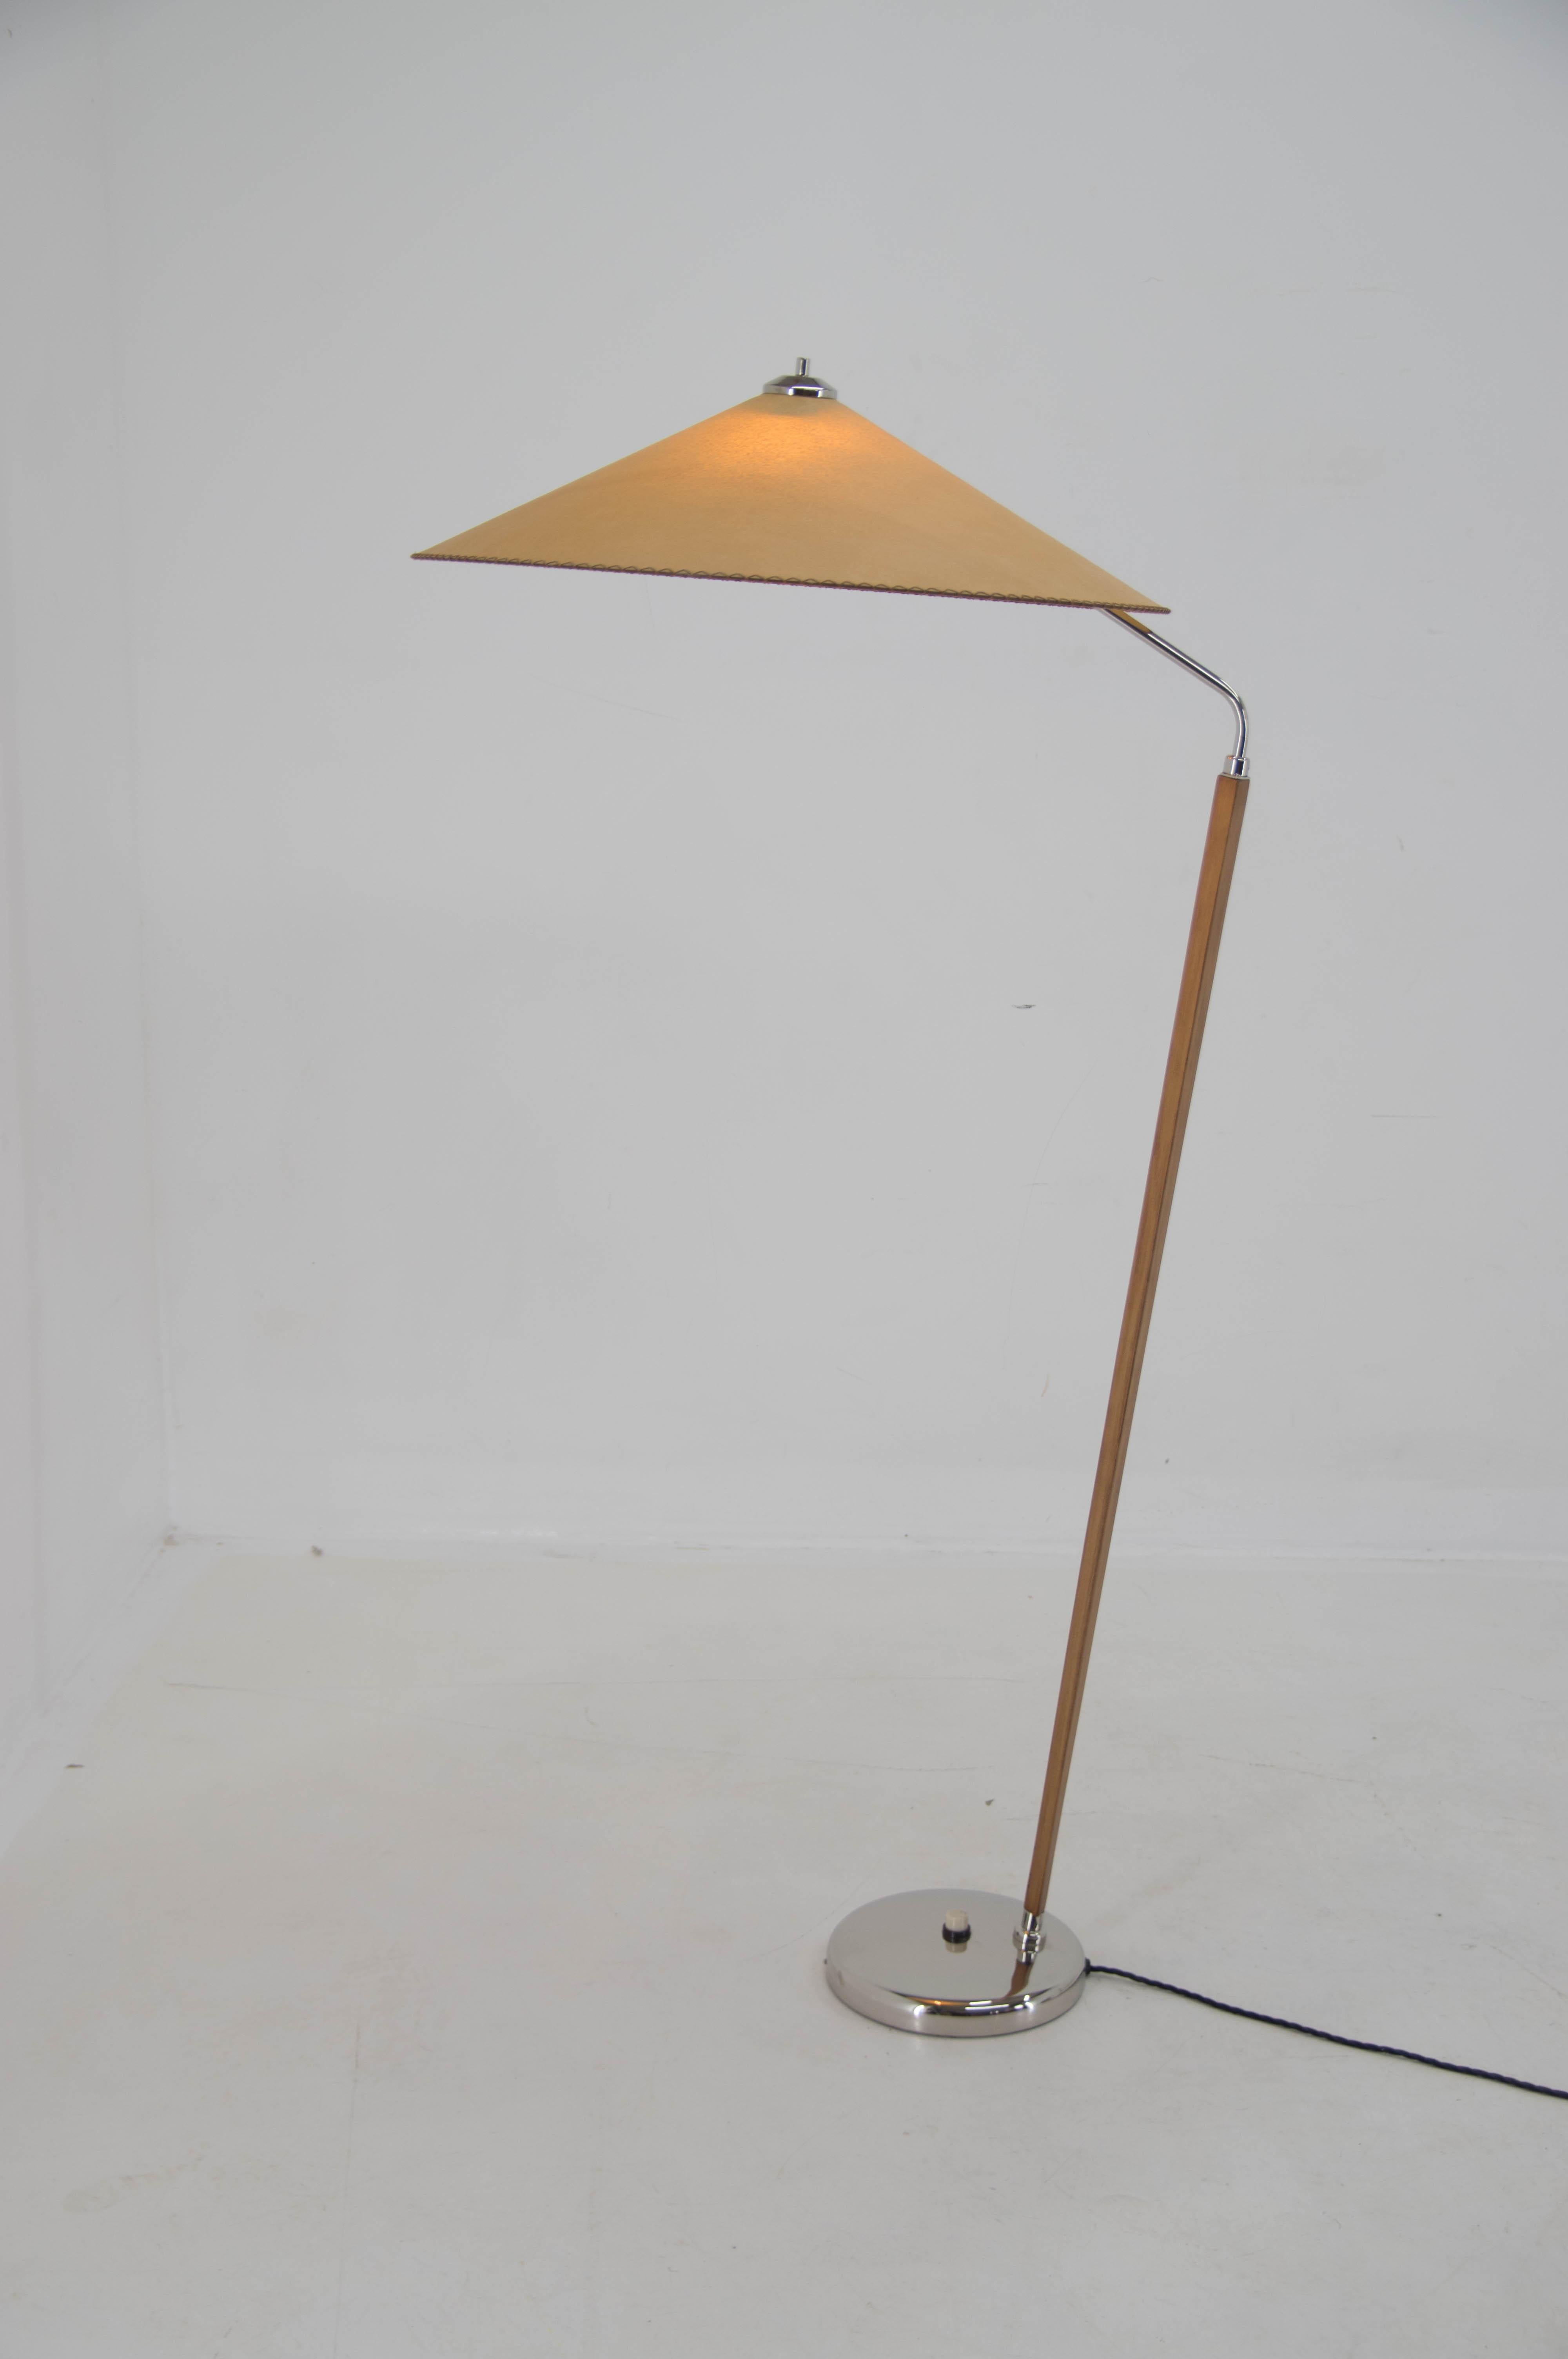 Iconic Zukov floor lamp made in Czechoslovakia in 1960s.
Completely restored, polished, new parchment shade, rewired:
2x40W, E25-E27 bulb
US plug adapter included.